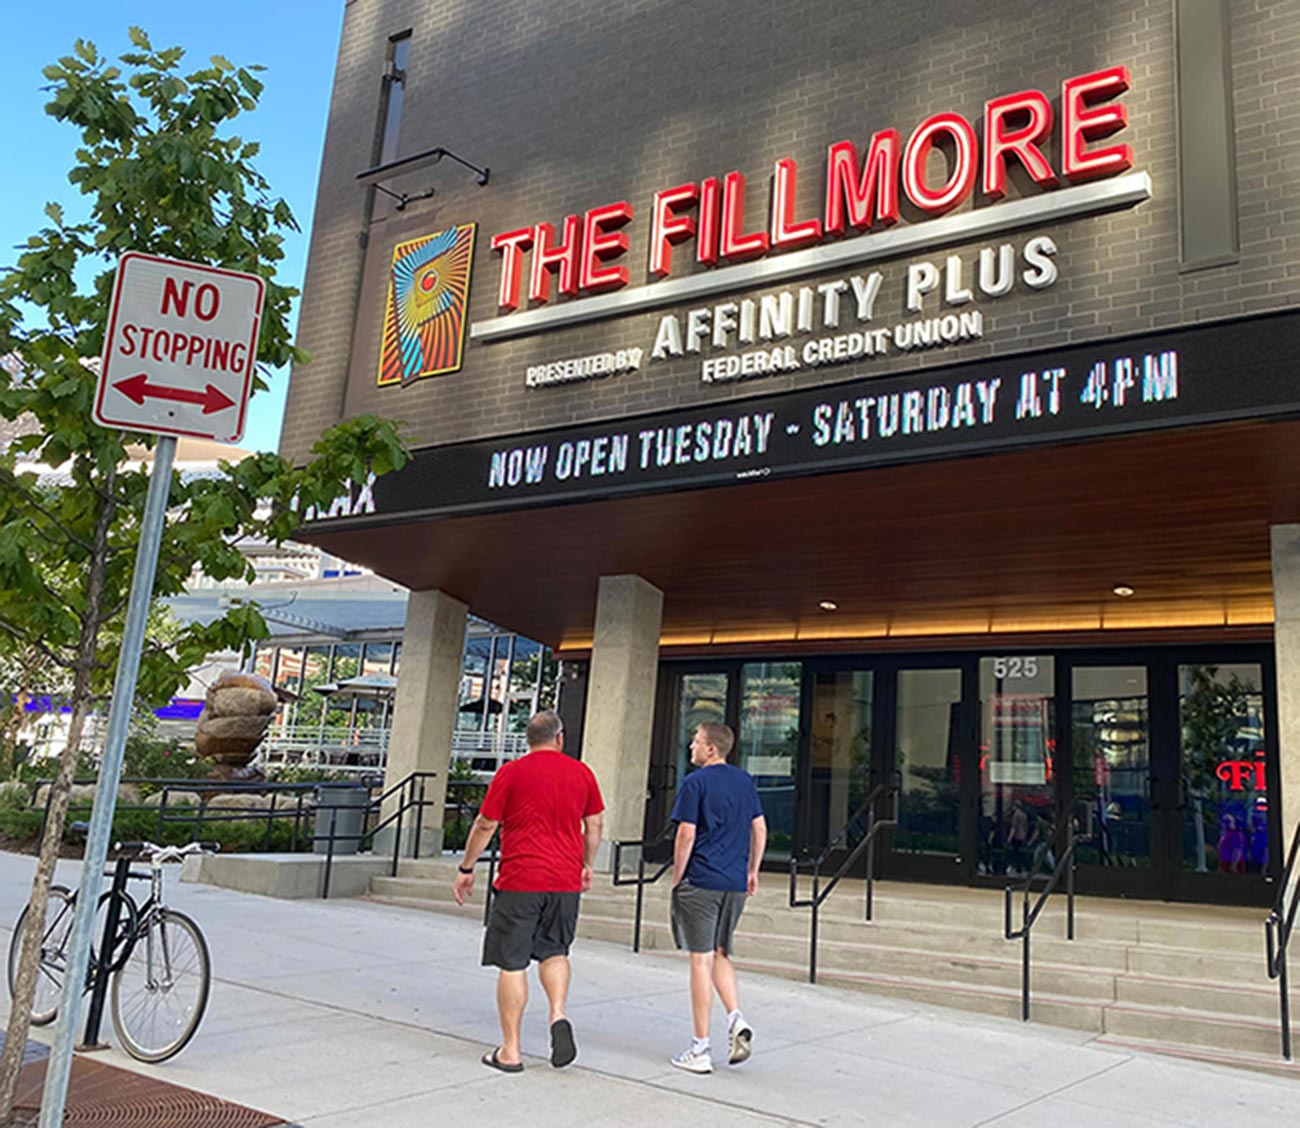 Front outdoor view of The Fillmore Minneapolis Presented by Affinity Plus